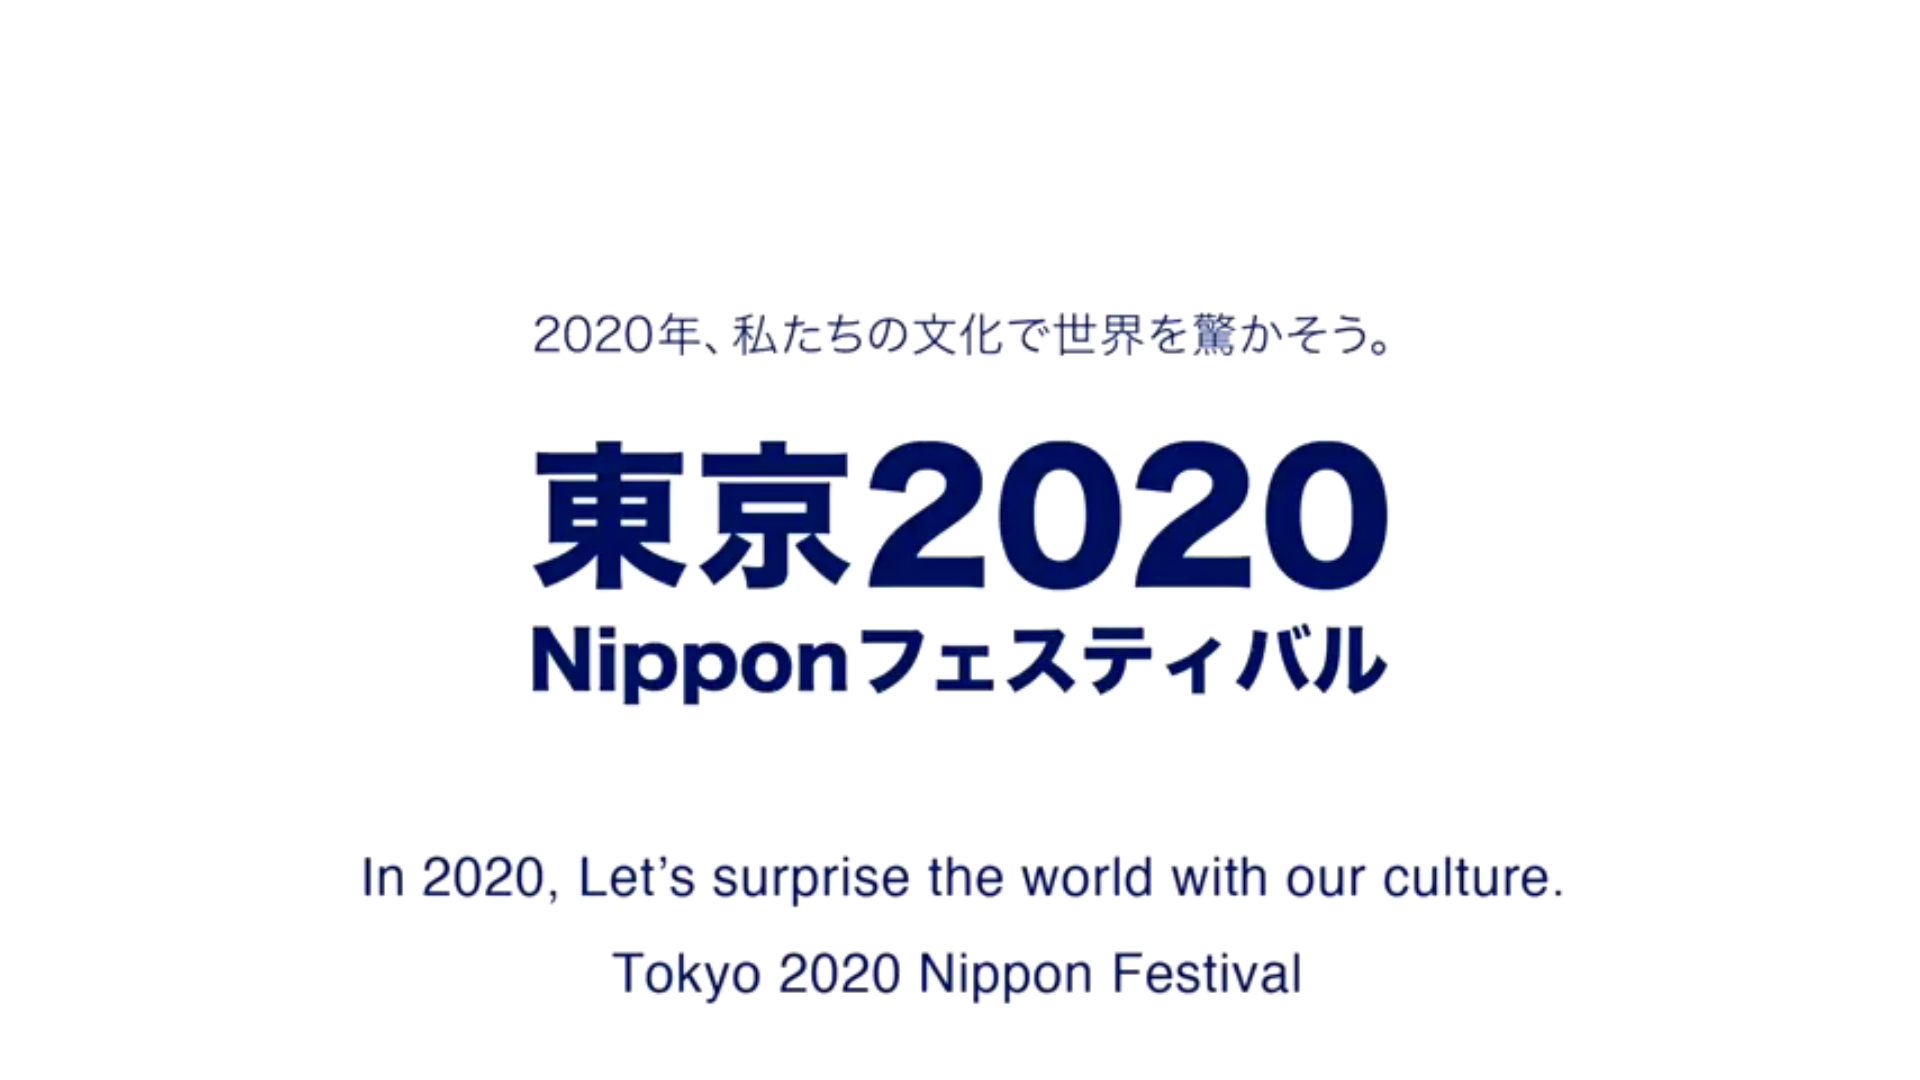 Tokyo 2020 hold first working group meeting to plan festival promoting Japanese culture